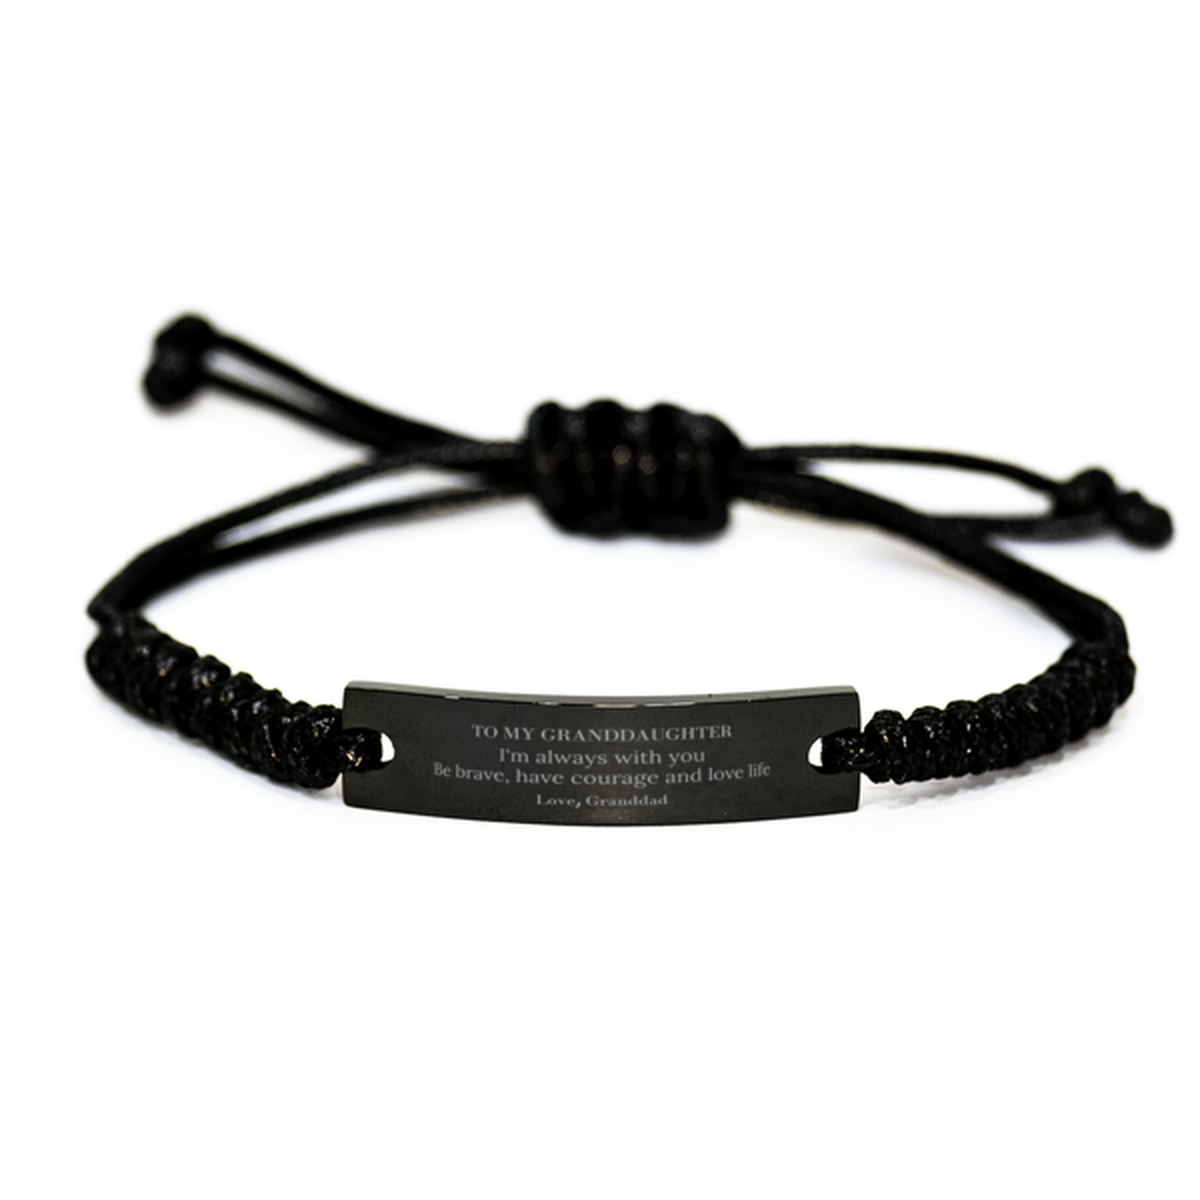 To My Granddaughter Gifts from Granddad, Unique Black Rope Bracelet Inspirational Christmas Birthday Graduation Gifts for Granddaughter I'm always with you. Be brave, have courage and love life. Love, Granddad